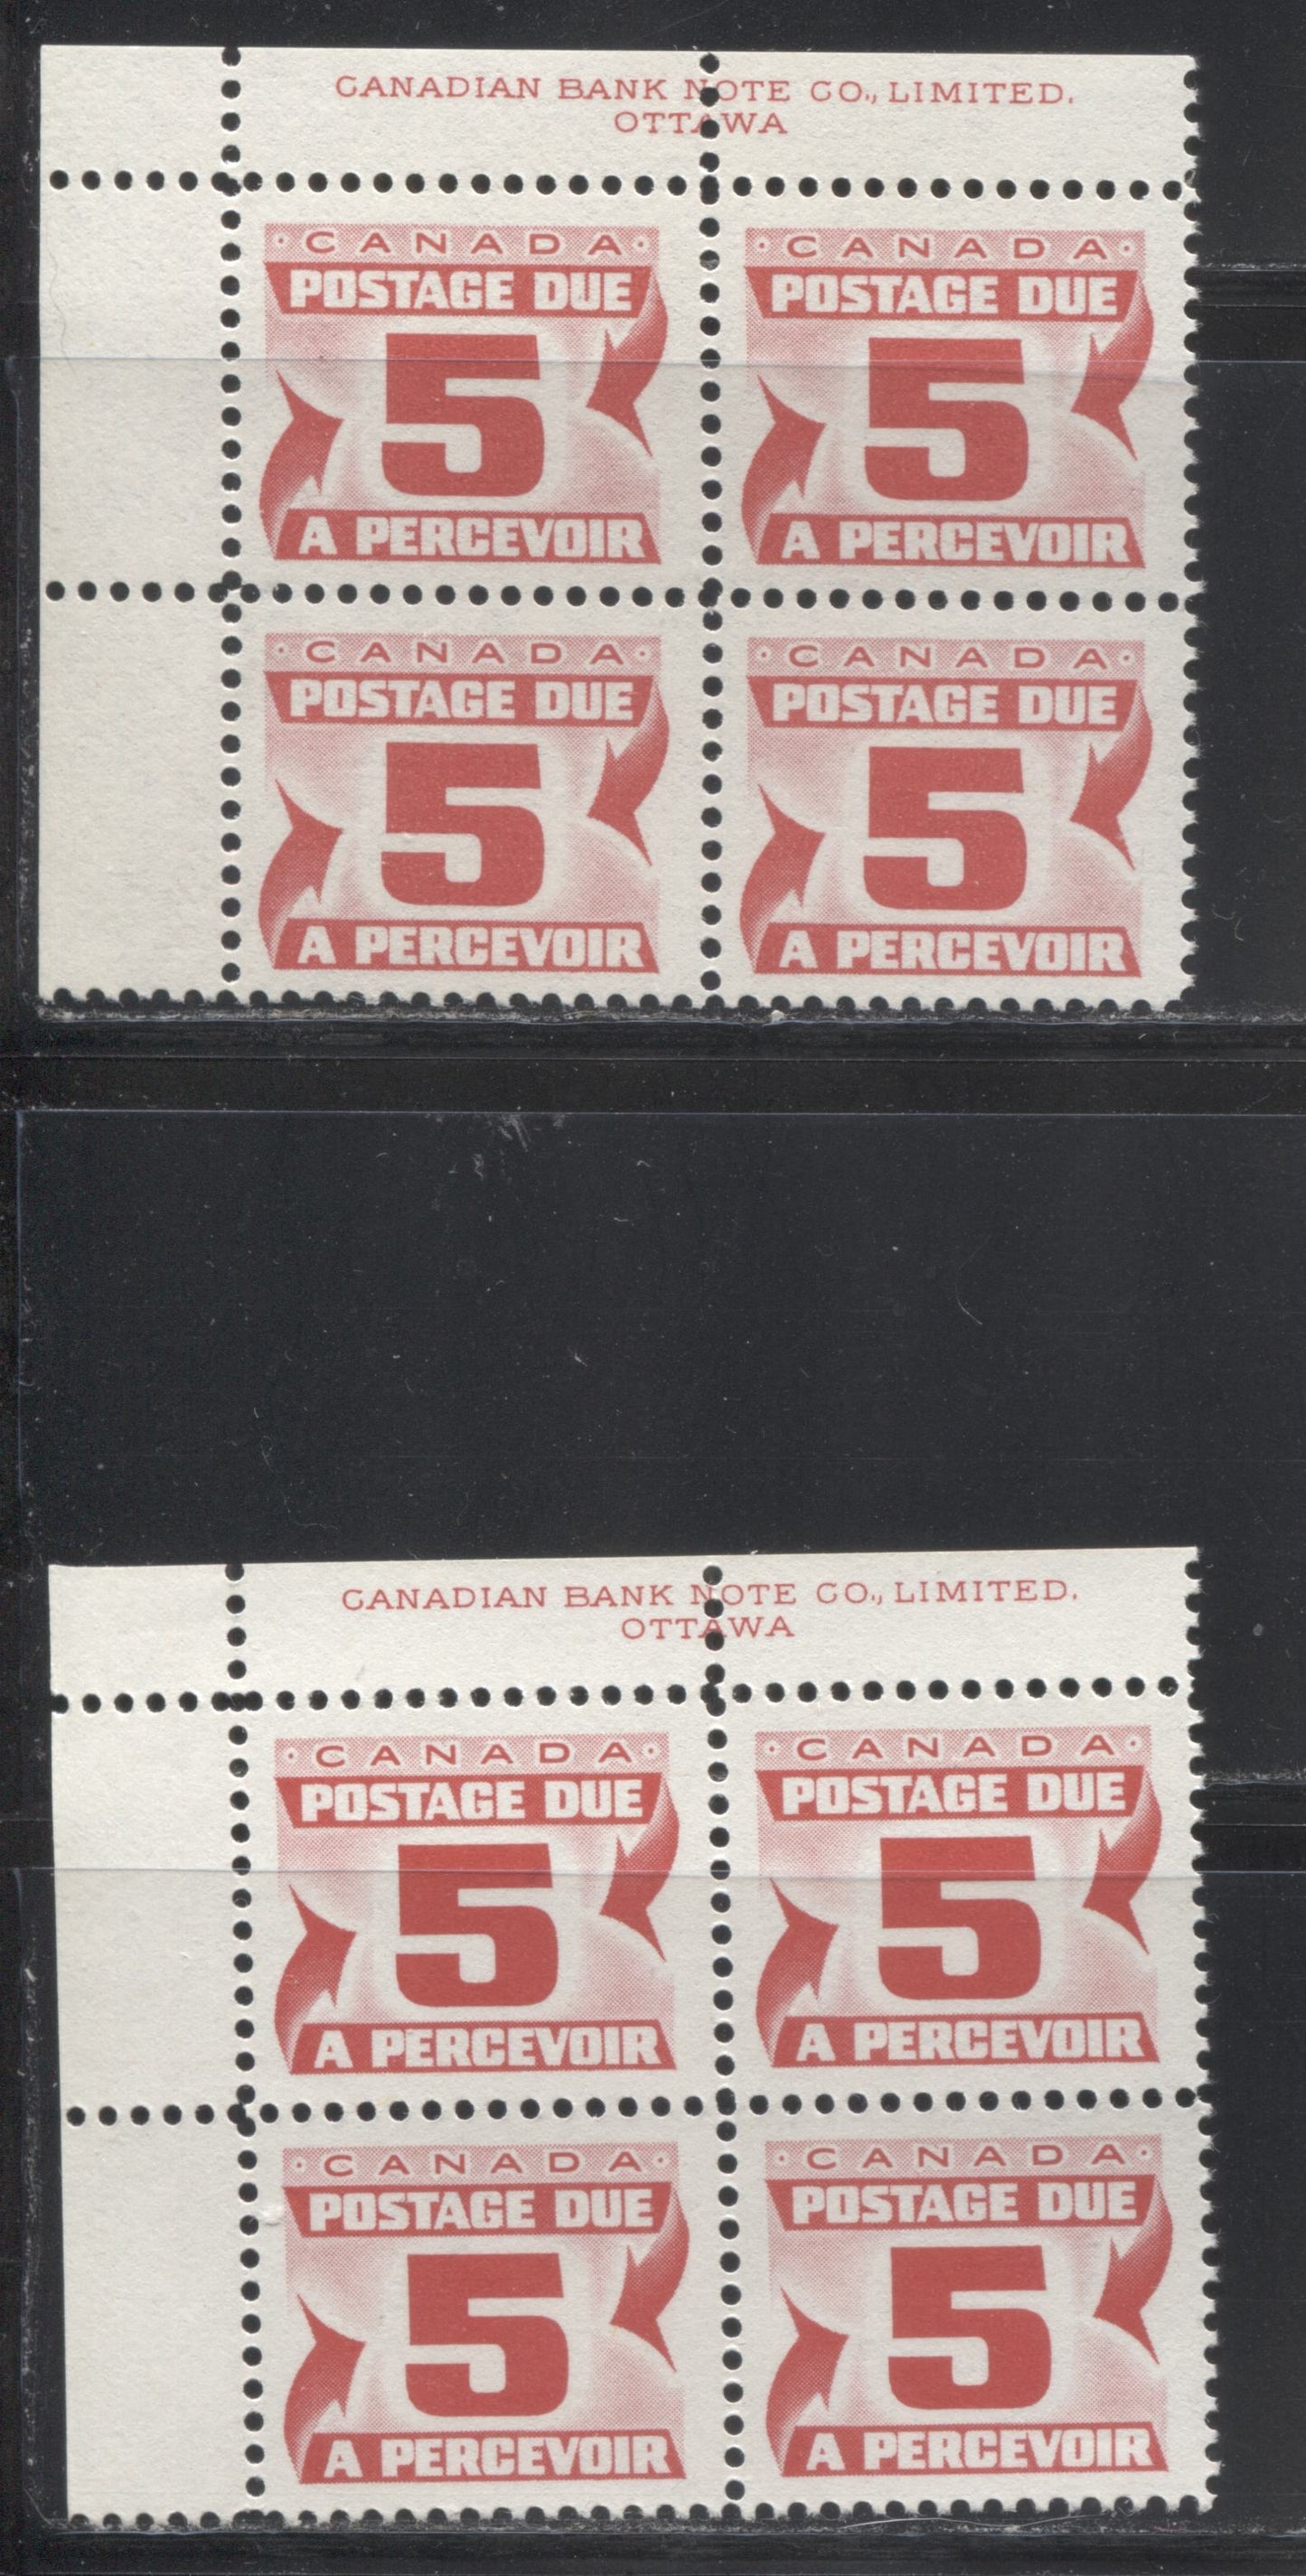 Lot 21 Canada #J25 5c Carmine Red 1967 1st Centennial Postage Due Issue, Two VFNH UL Inscription Blocks Of 4 On DF Grayish White Horizontal Ribbed & Bluish White Papers With Smooth Dex Gum, Perf 12